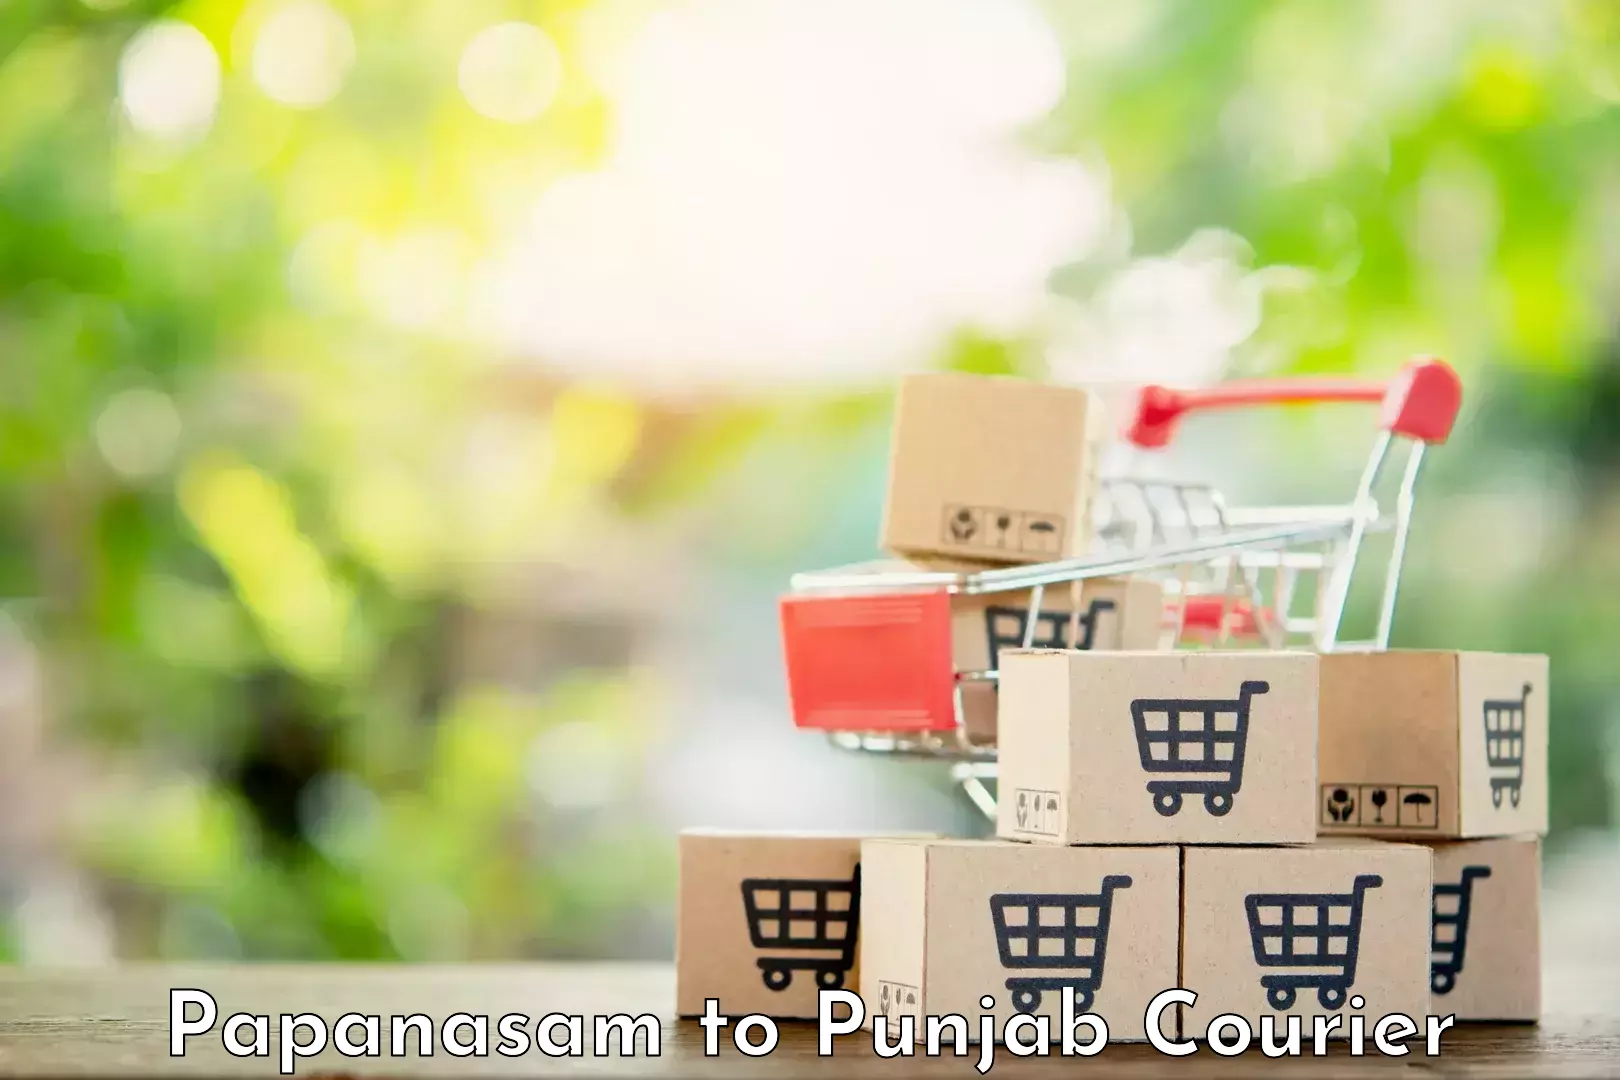 Courier app Papanasam to Malout